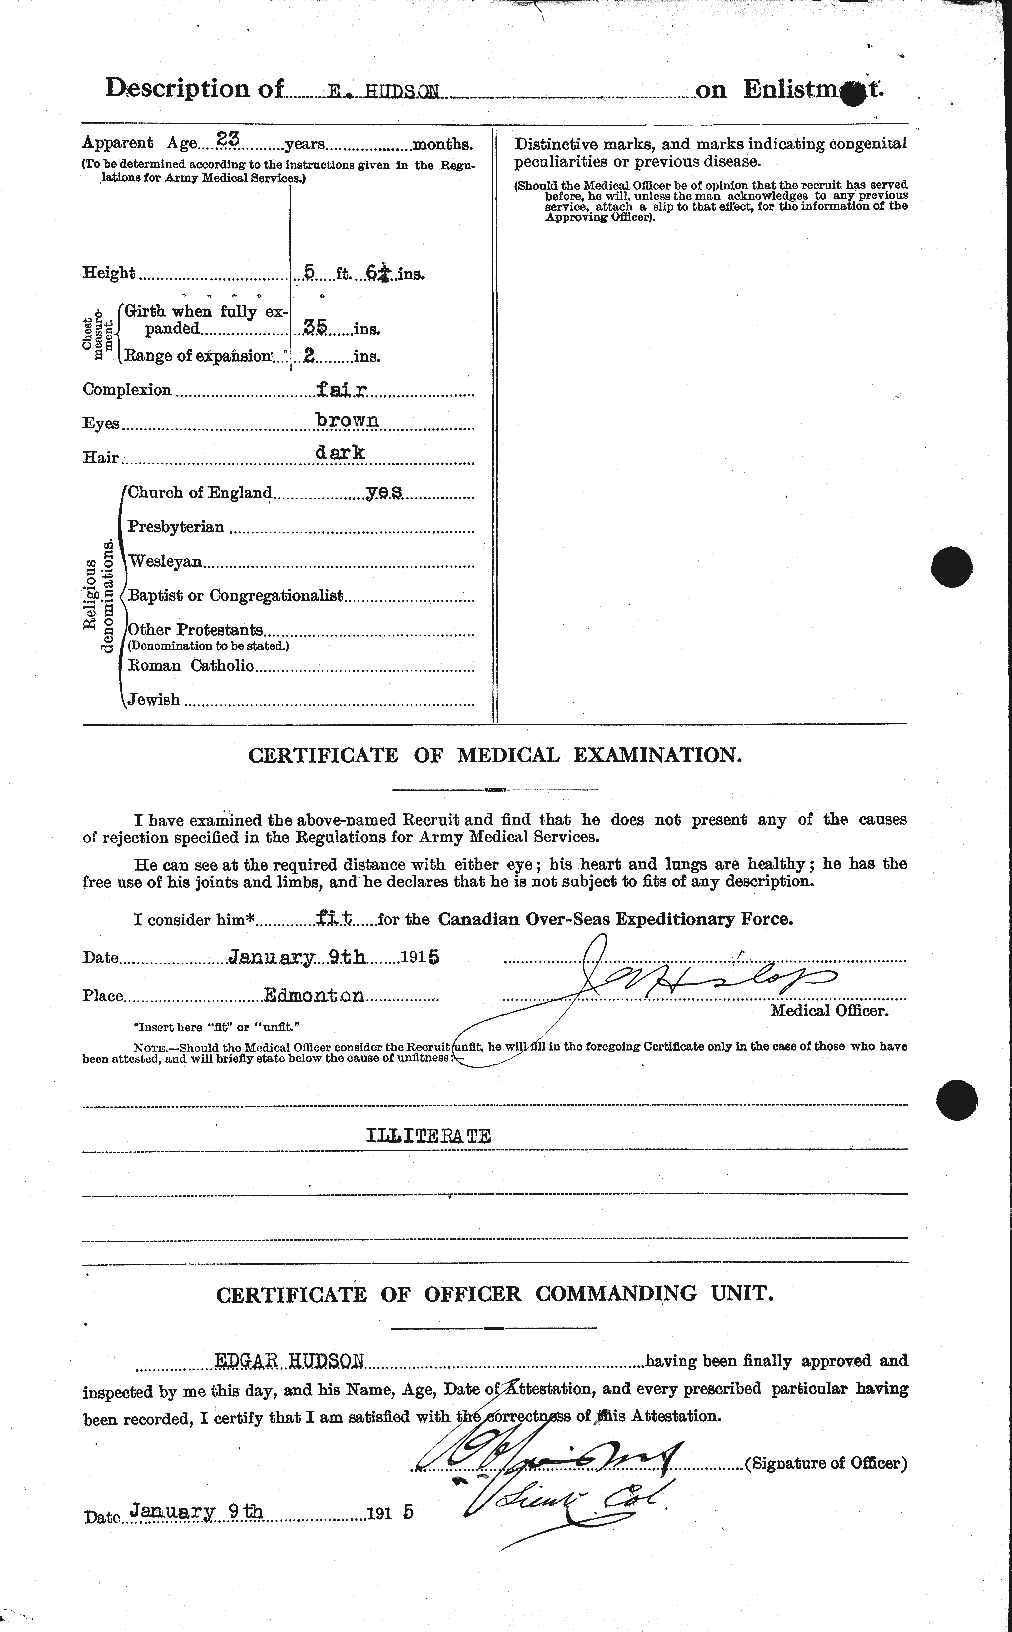 Personnel Records of the First World War - CEF 398887b